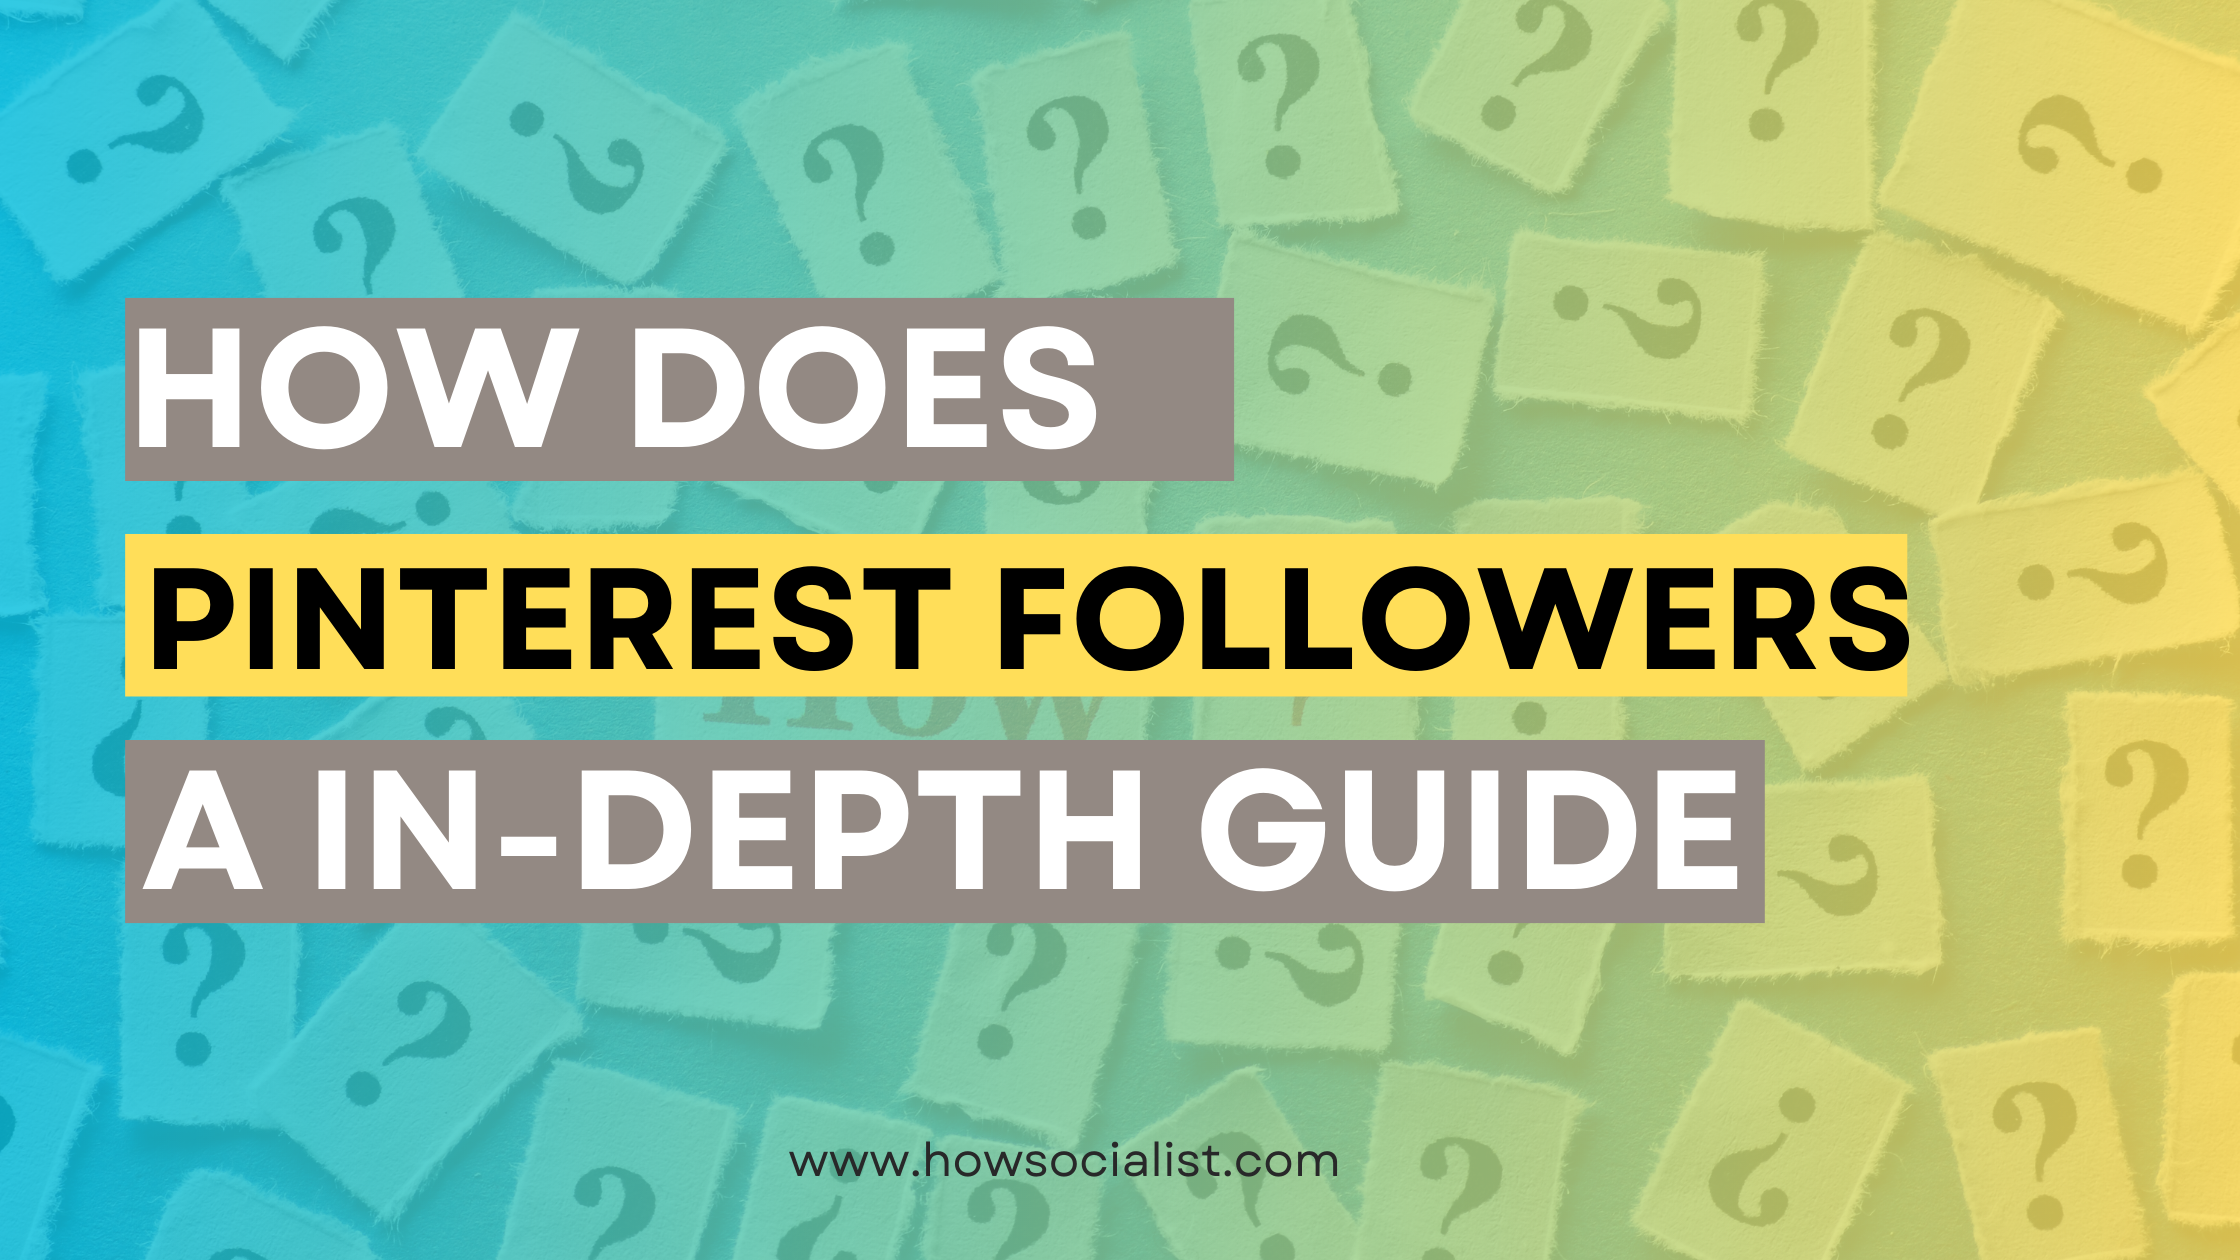 How Does Pinterest Followers Work - A In-Depth Guide